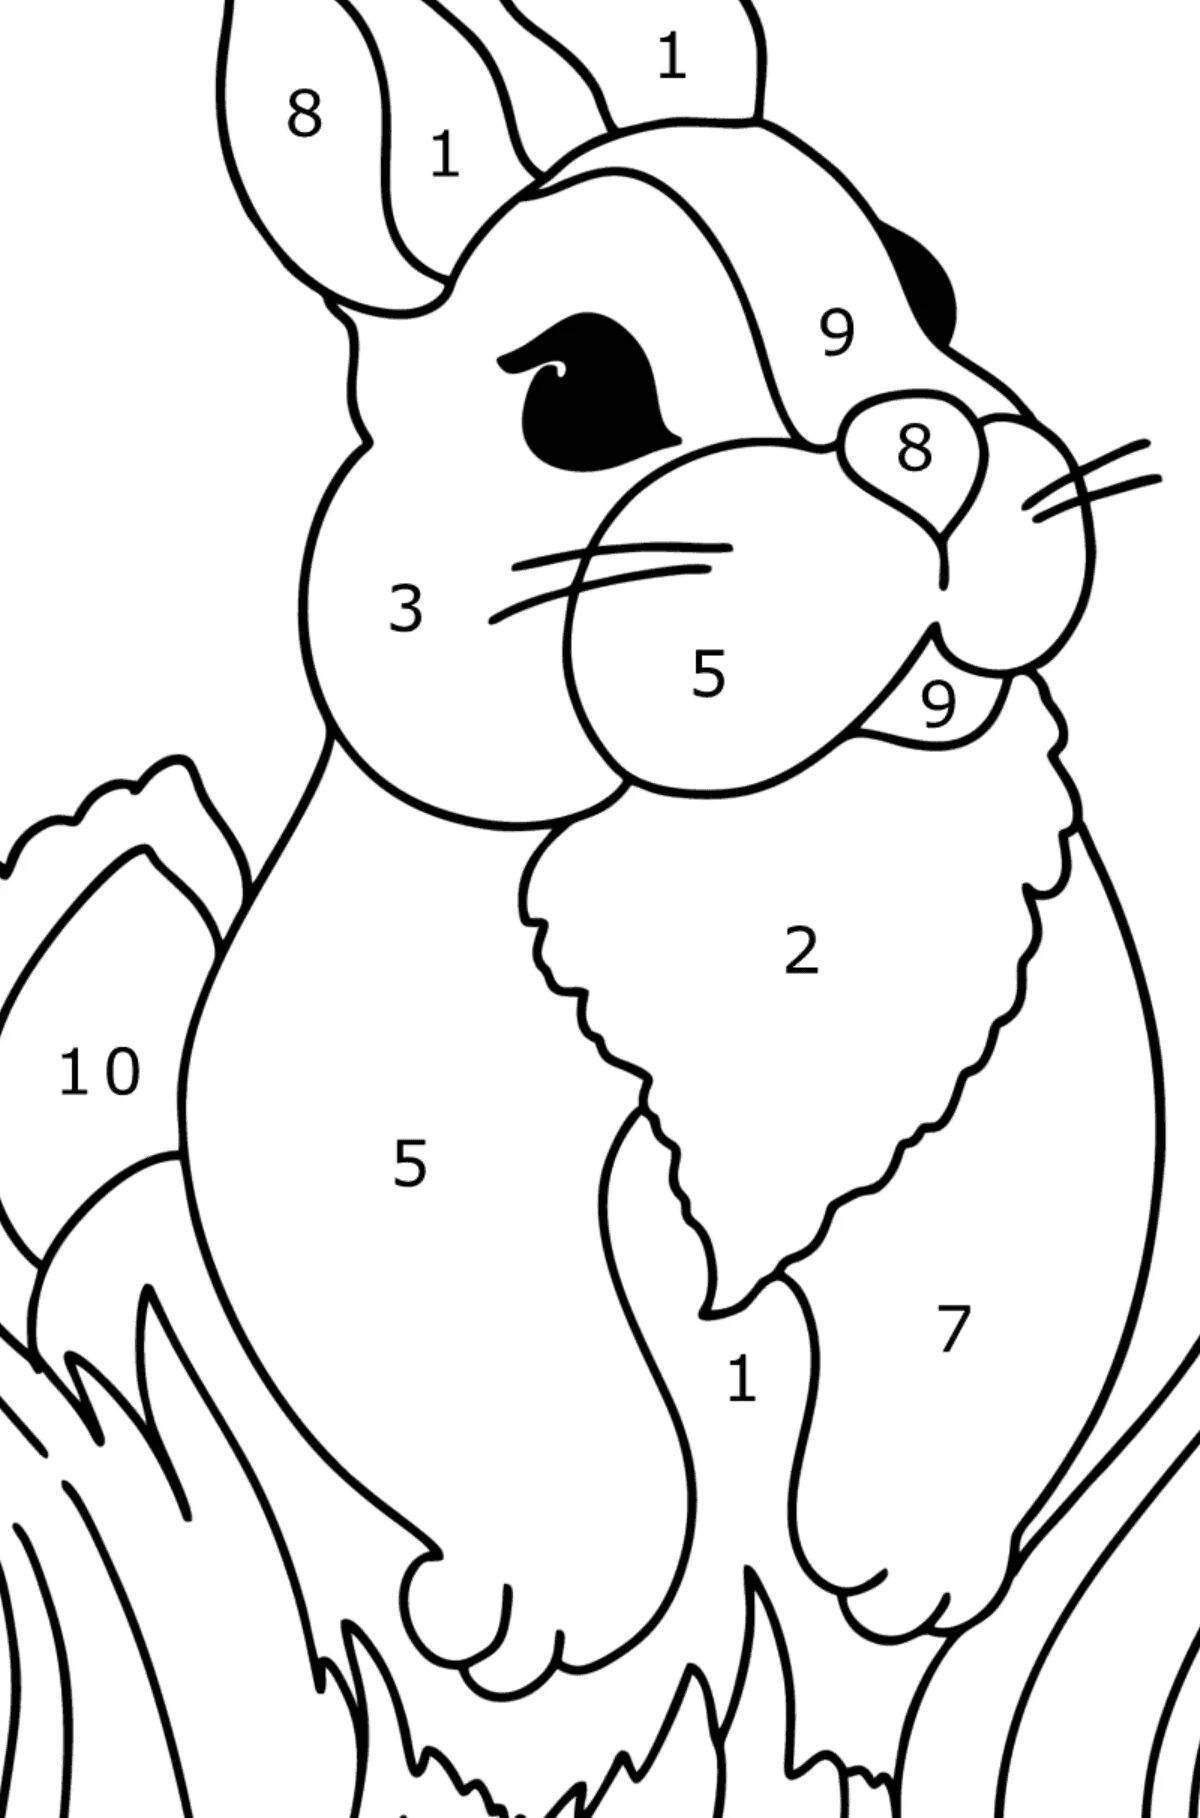 Holiday bunny coloring by numbers